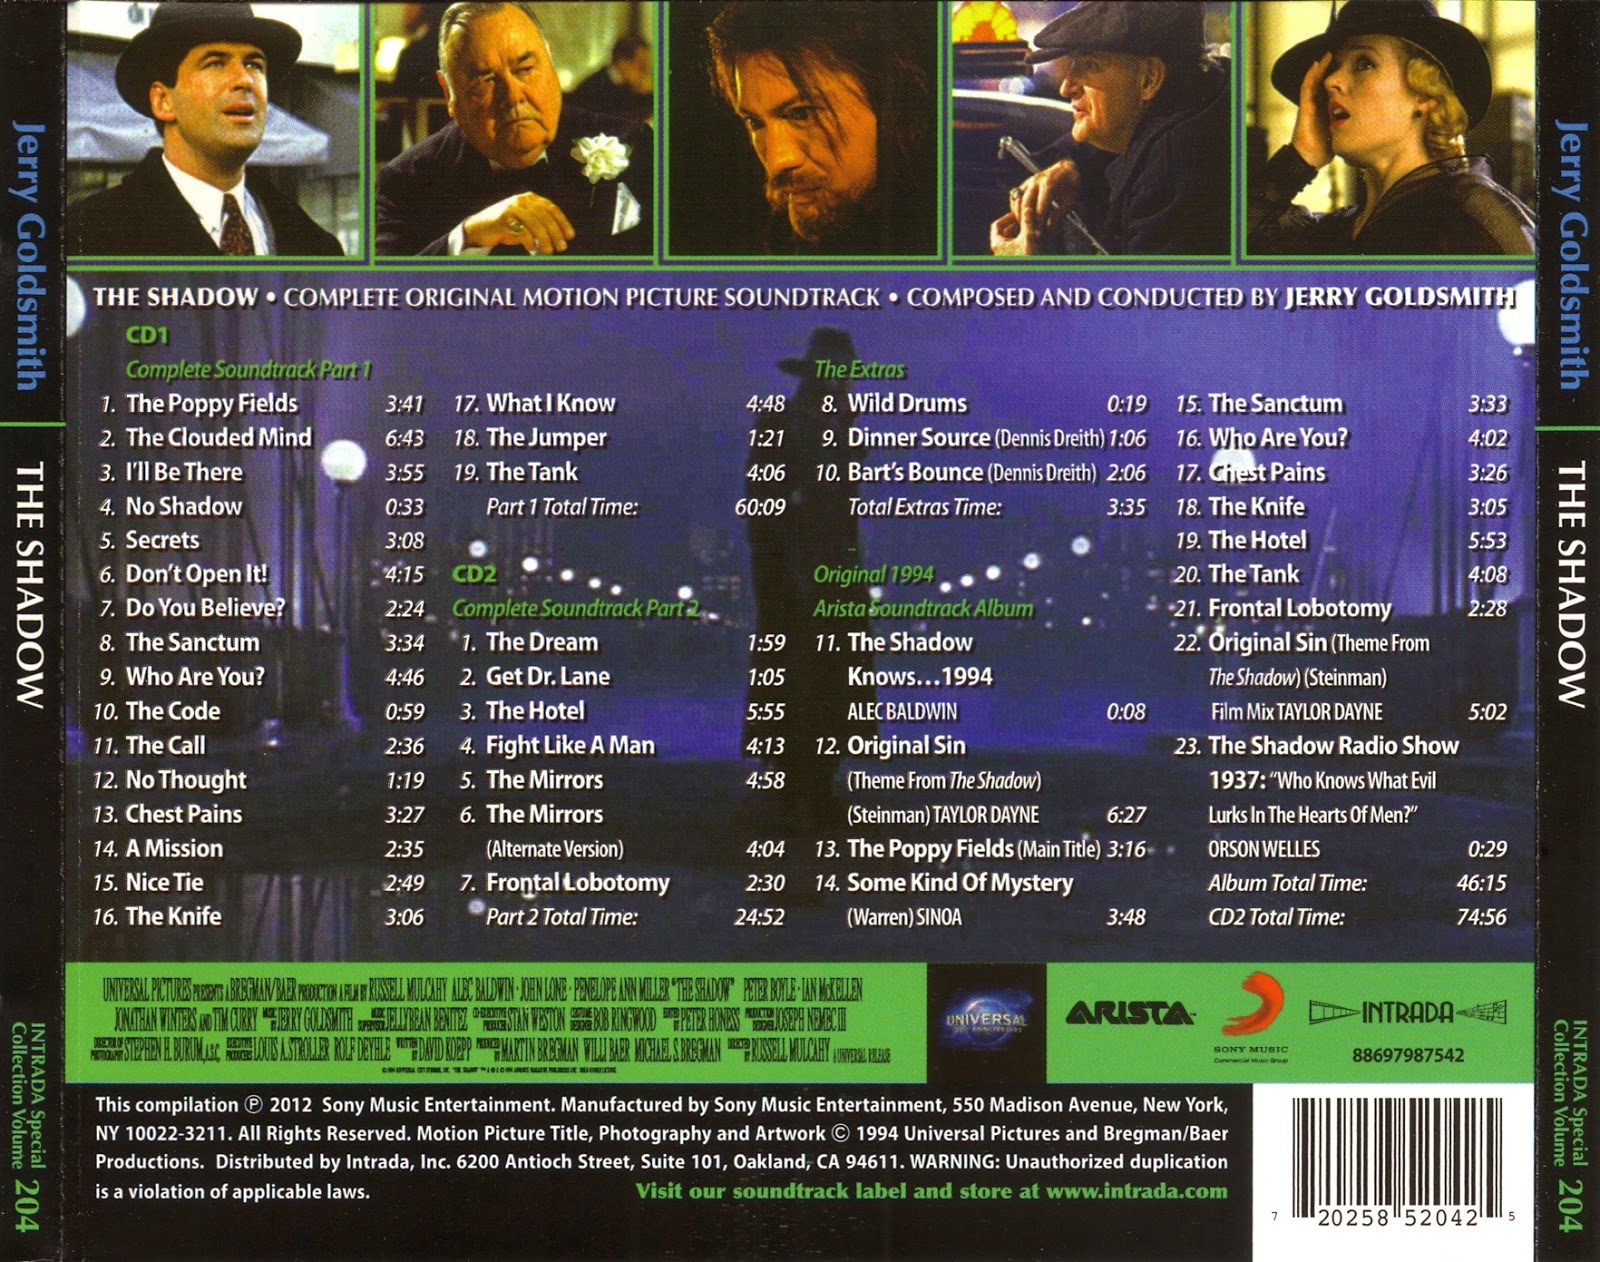 Score soundtrack. Fixing the Shadow OST 1993. Look to the Shadow OST.